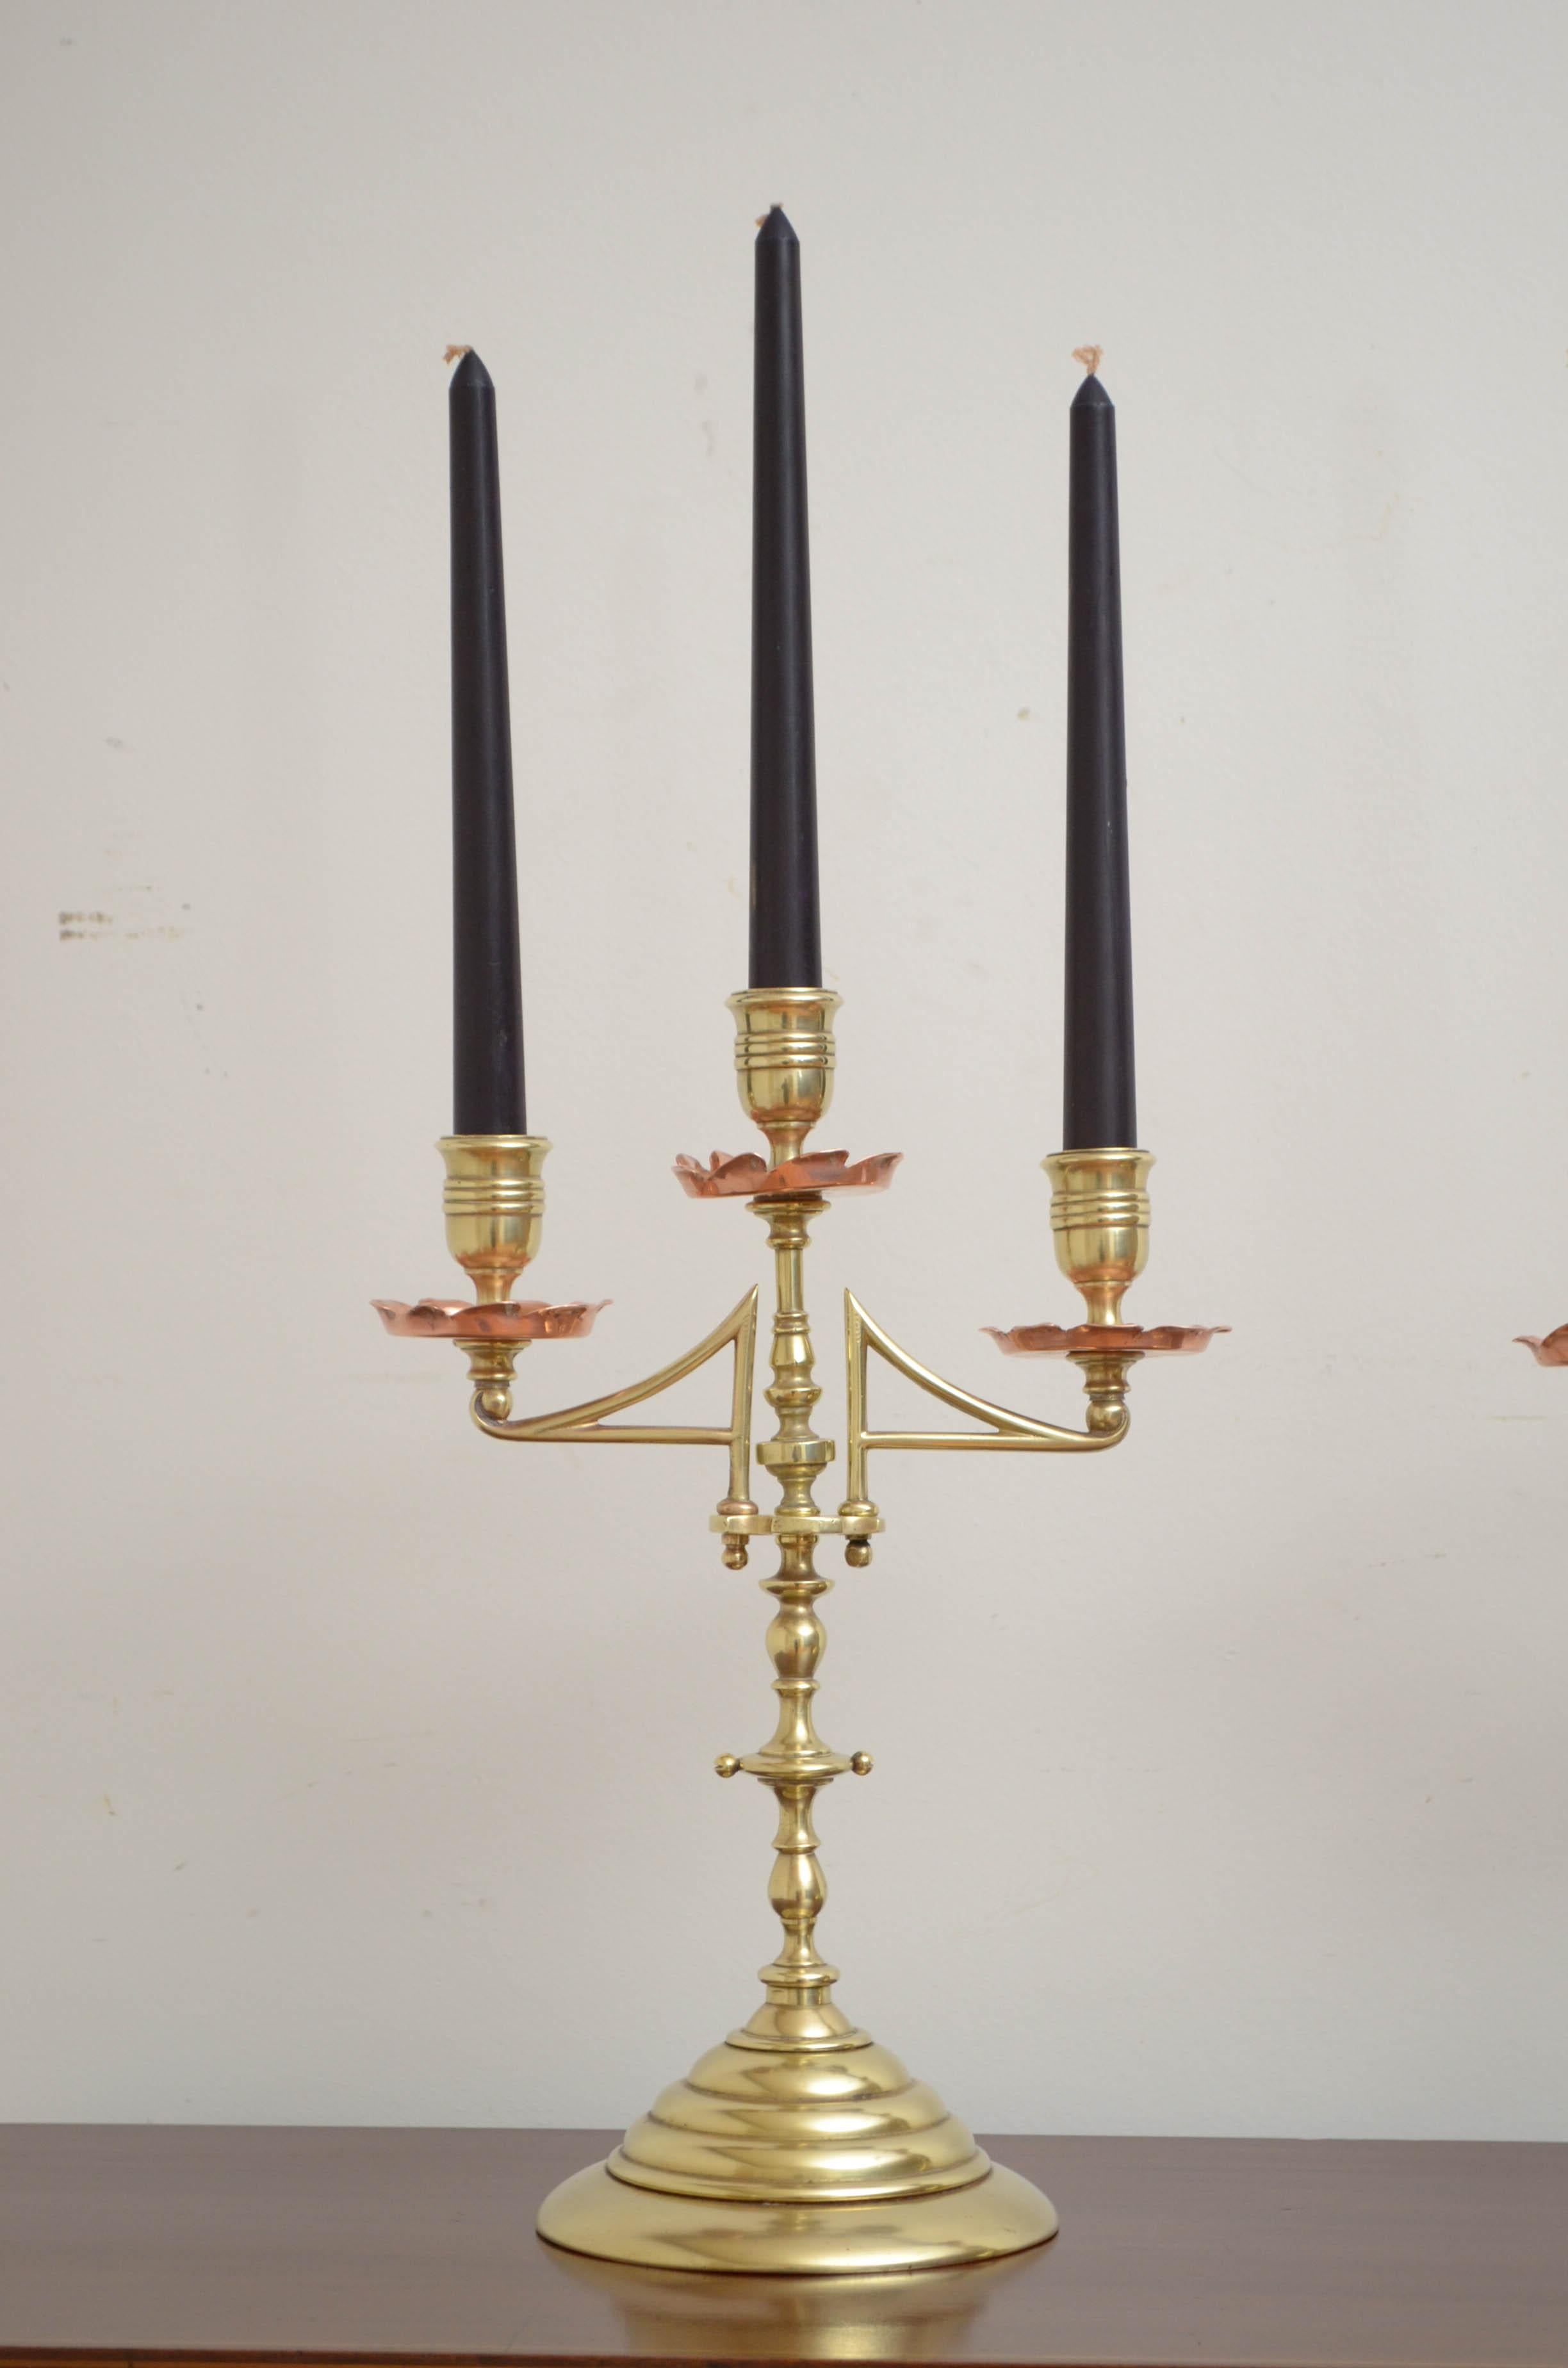 Stylish Arts & Crafts brass and copper candlestick holders. This pair of antique candlestick holders comes apart to enable easy cleaning. The pair has been cleaned and polished and is ready to use at home, circa 1900
Measures: H 13.5